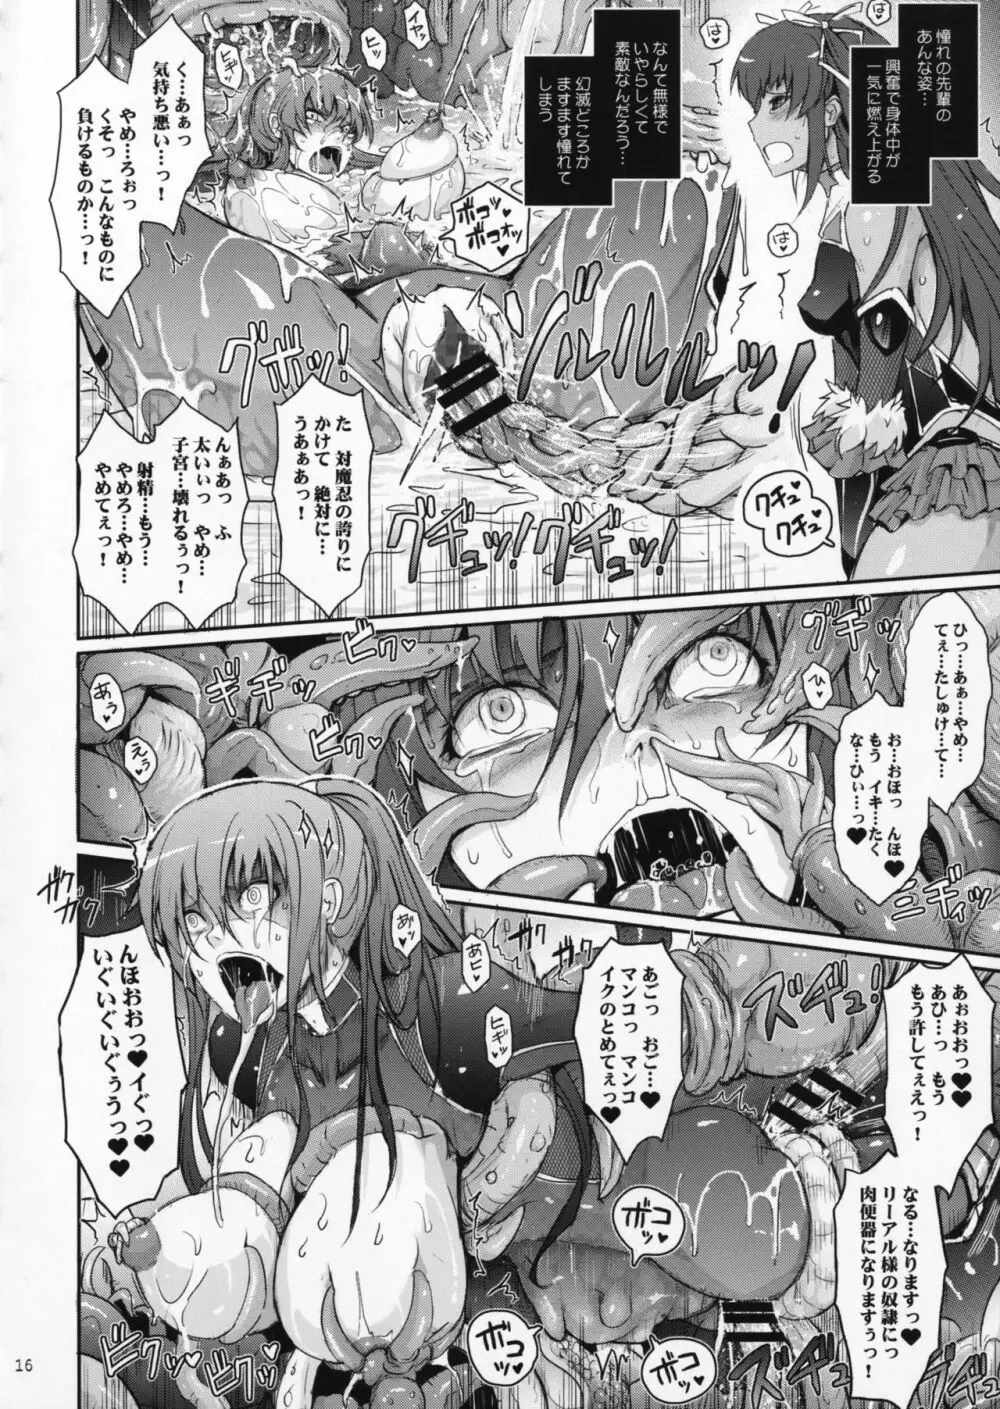 TENTACLES 隷嬢秋山凛子の蜜箱 Page.15